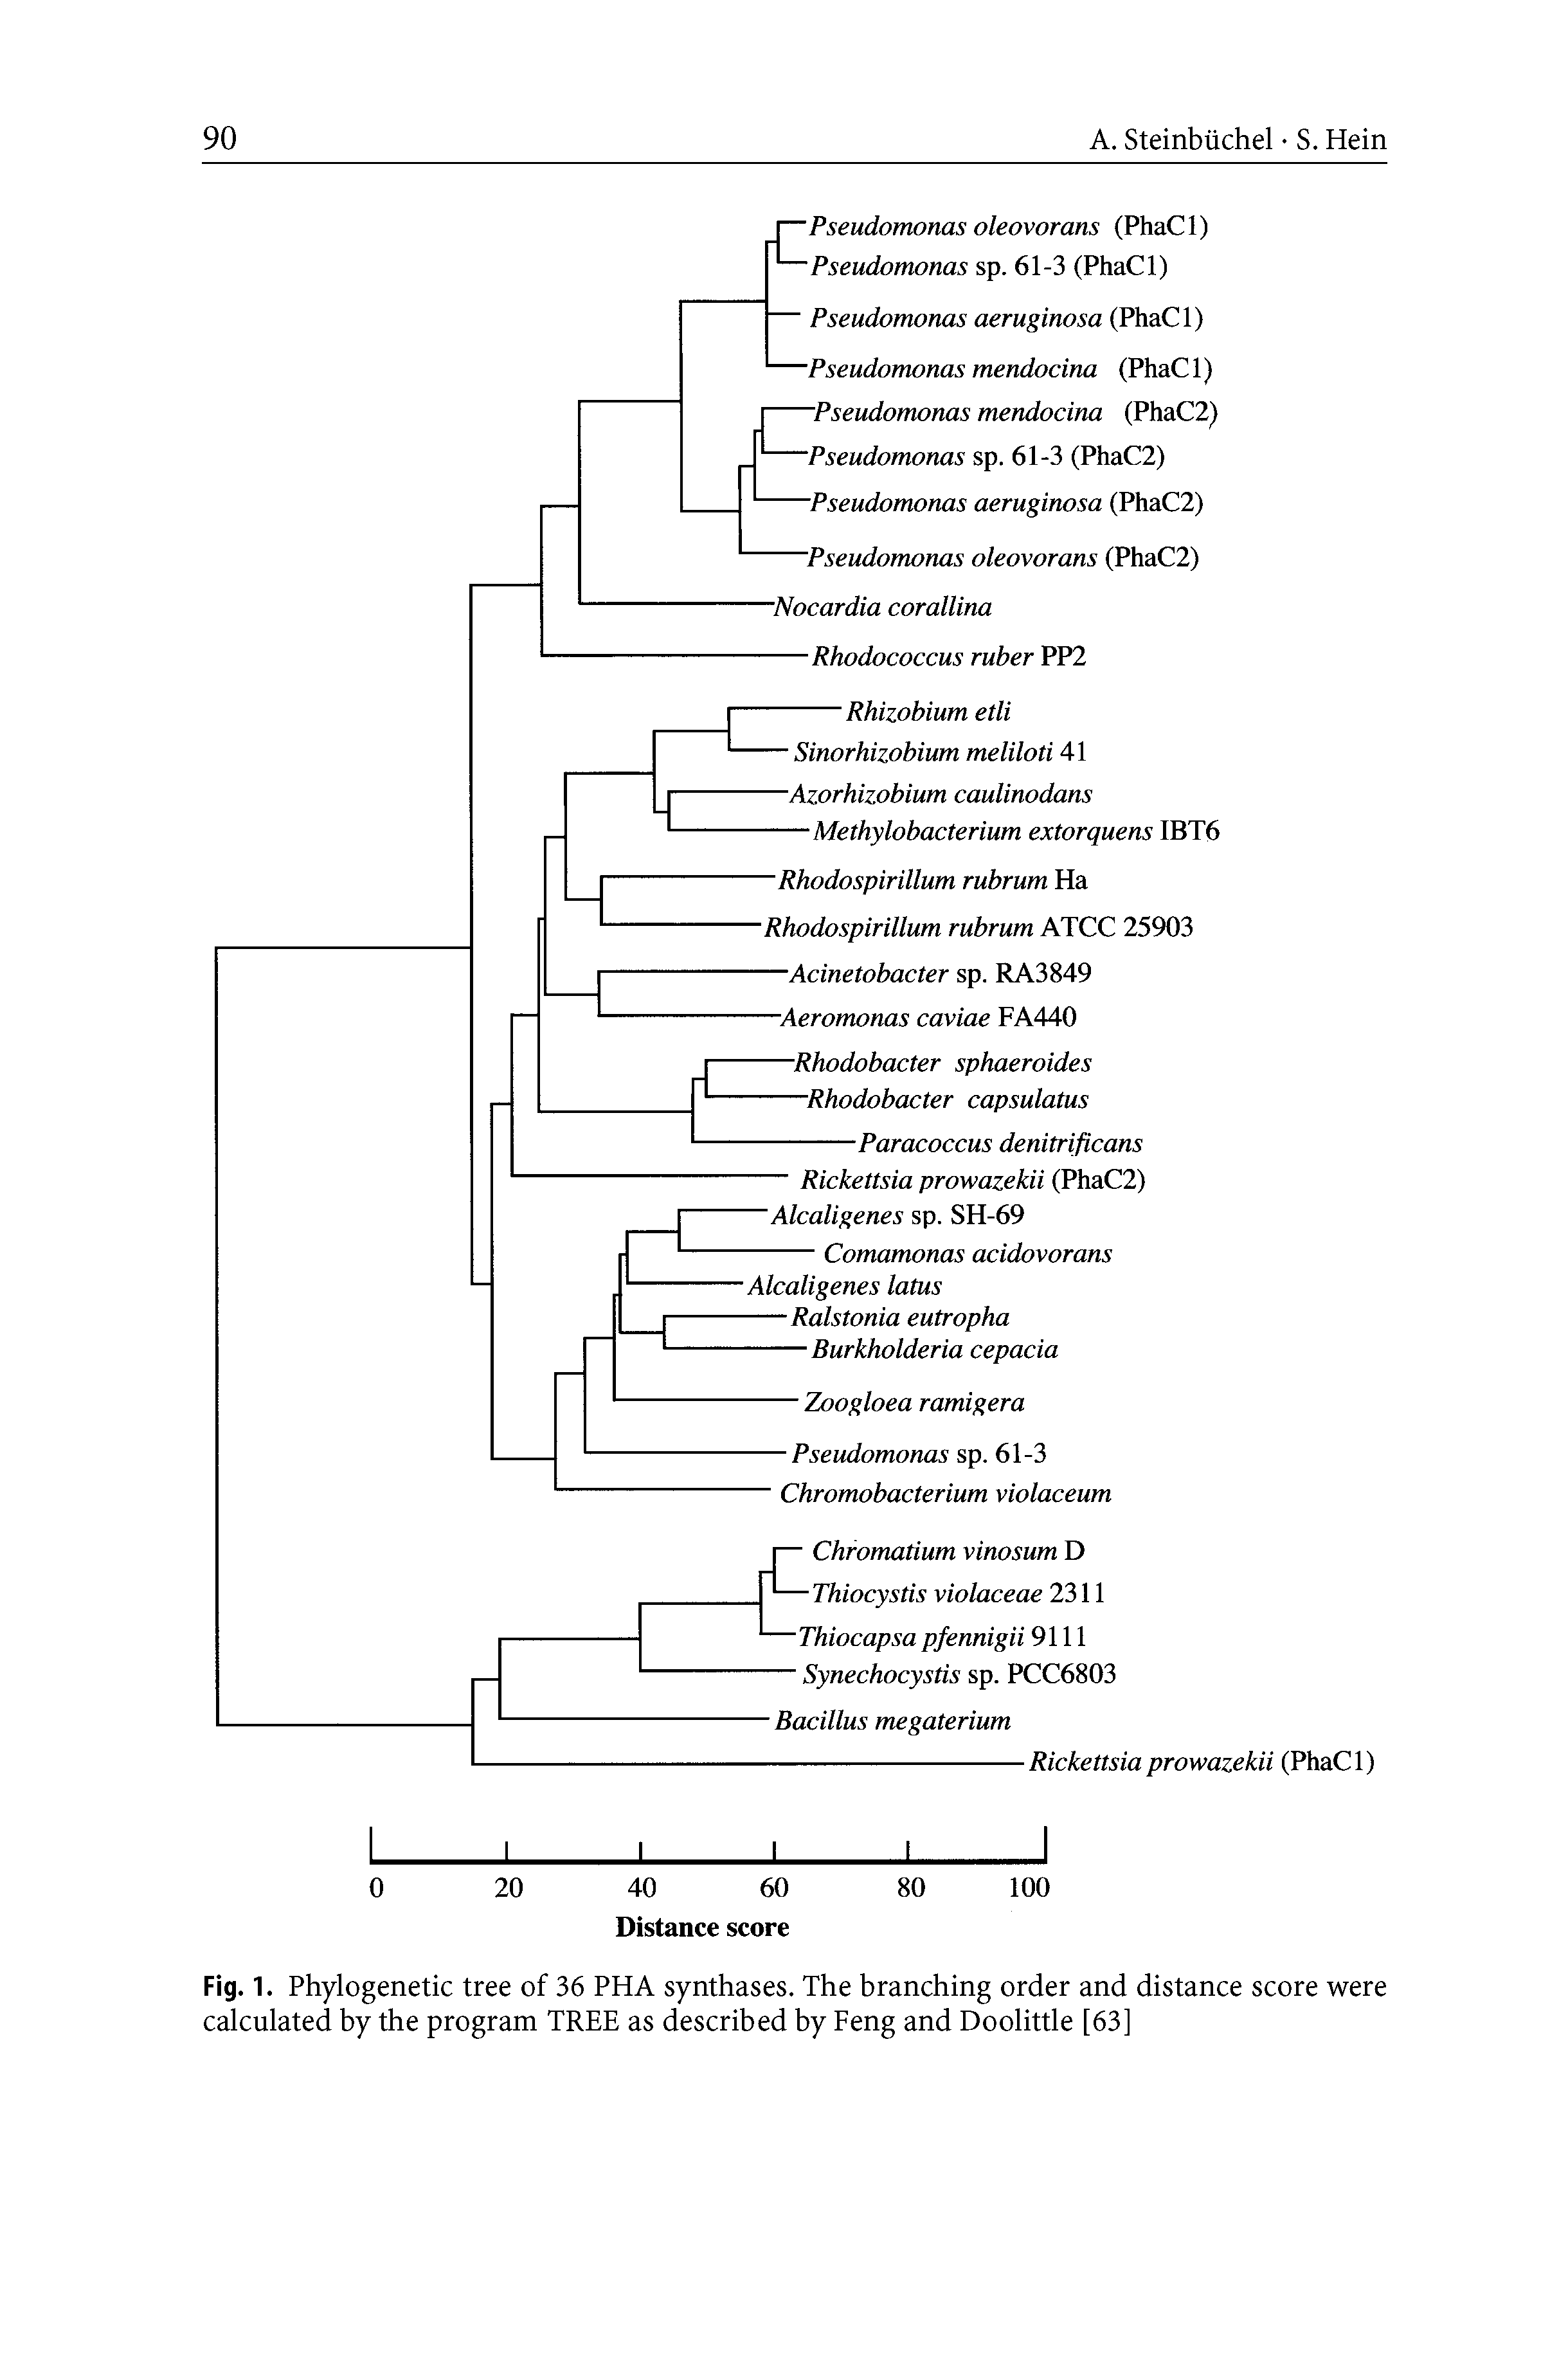 Fig. 1. Phylogenetic tree of 36 PHA synthases. The branching order and distance score were calculated by the program TREE as described by Feng and Doolittle [63]...